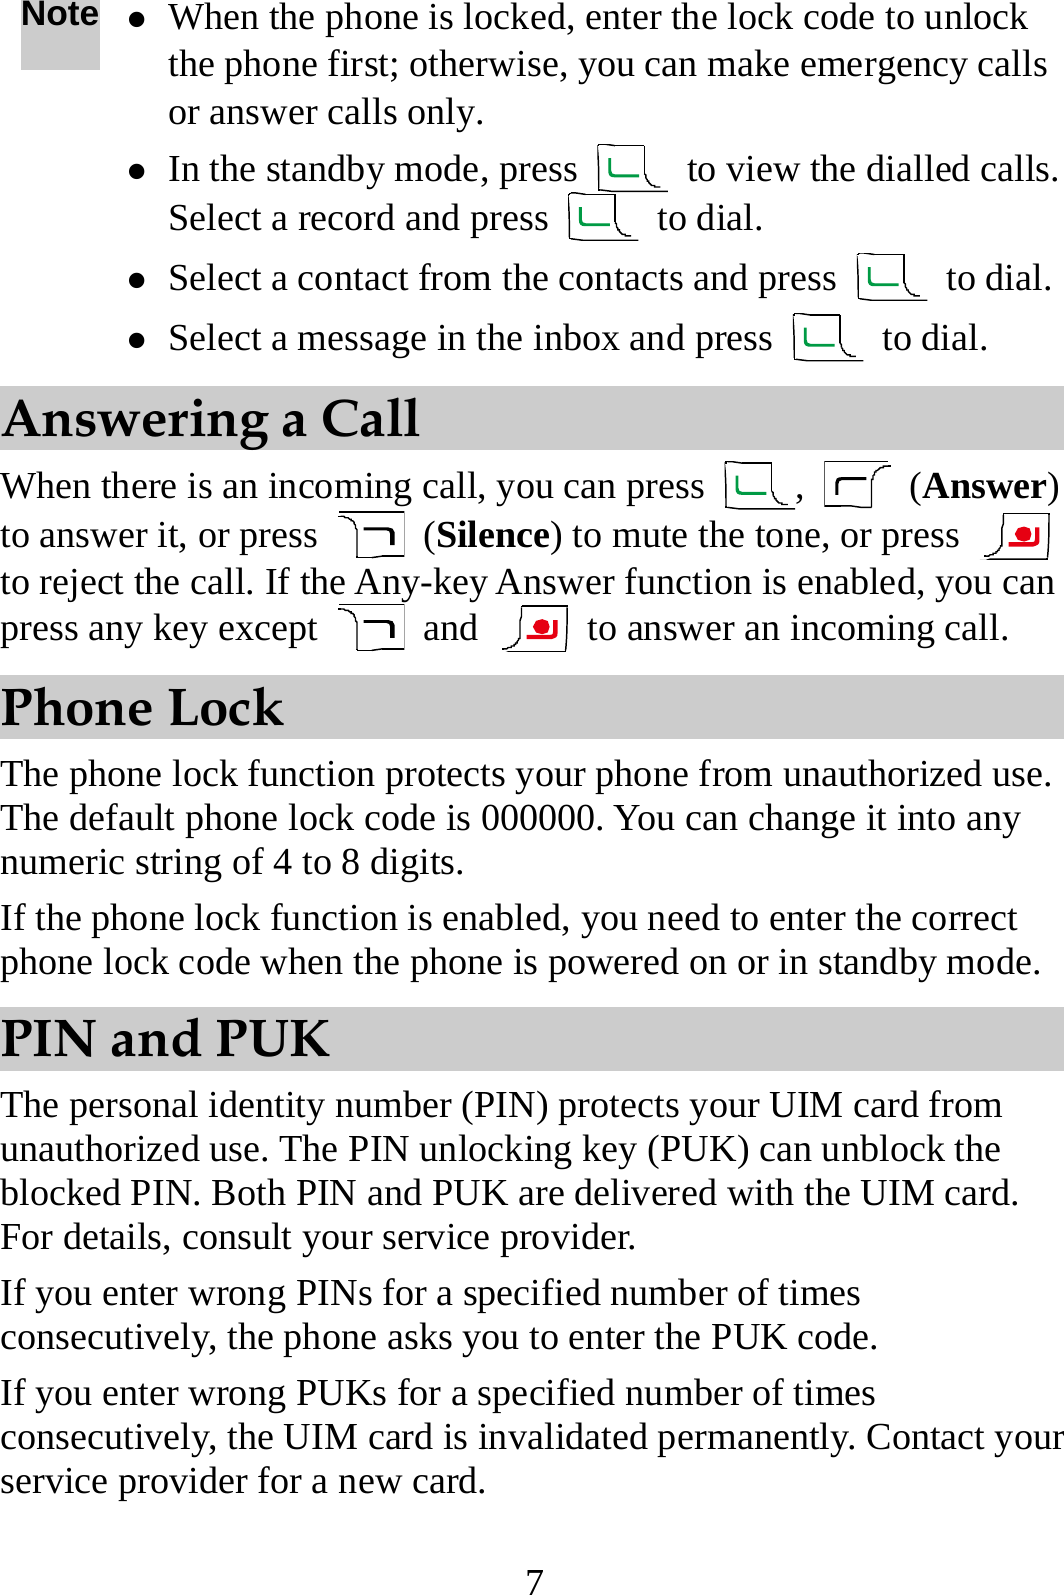 7 Note z When the phone is locked, enter the lock code to unlock the phone first; otherwise, you can make emergency calls or answer calls only. z In the standby mode, press    to view the dialled calls. Select a record and press   to dial. z Select a contact from the contacts and press   to dial.z Select a message in the inbox and press   to dial. Answering a Call When there is an incoming call, you can press  ,   (Answer) to answer it, or press   (Silence) to mute the tone, or press   to reject the call. If the Any-key Answer function is enabled, you can press any key except   and    to answer an incoming call. Phone Lock The phone lock function protects your phone from unauthorized use. The default phone lock code is 000000. You can change it into any numeric string of 4 to 8 digits. If the phone lock function is enabled, you need to enter the correct phone lock code when the phone is powered on or in standby mode. PIN and PUK The personal identity number (PIN) protects your UIM card from unauthorized use. The PIN unlocking key (PUK) can unblock the blocked PIN. Both PIN and PUK are delivered with the UIM card. For details, consult your service provider. If you enter wrong PINs for a specified number of times consecutively, the phone asks you to enter the PUK code. If you enter wrong PUKs for a specified number of times consecutively, the UIM card is invalidated permanently. Contact your service provider for a new card. 